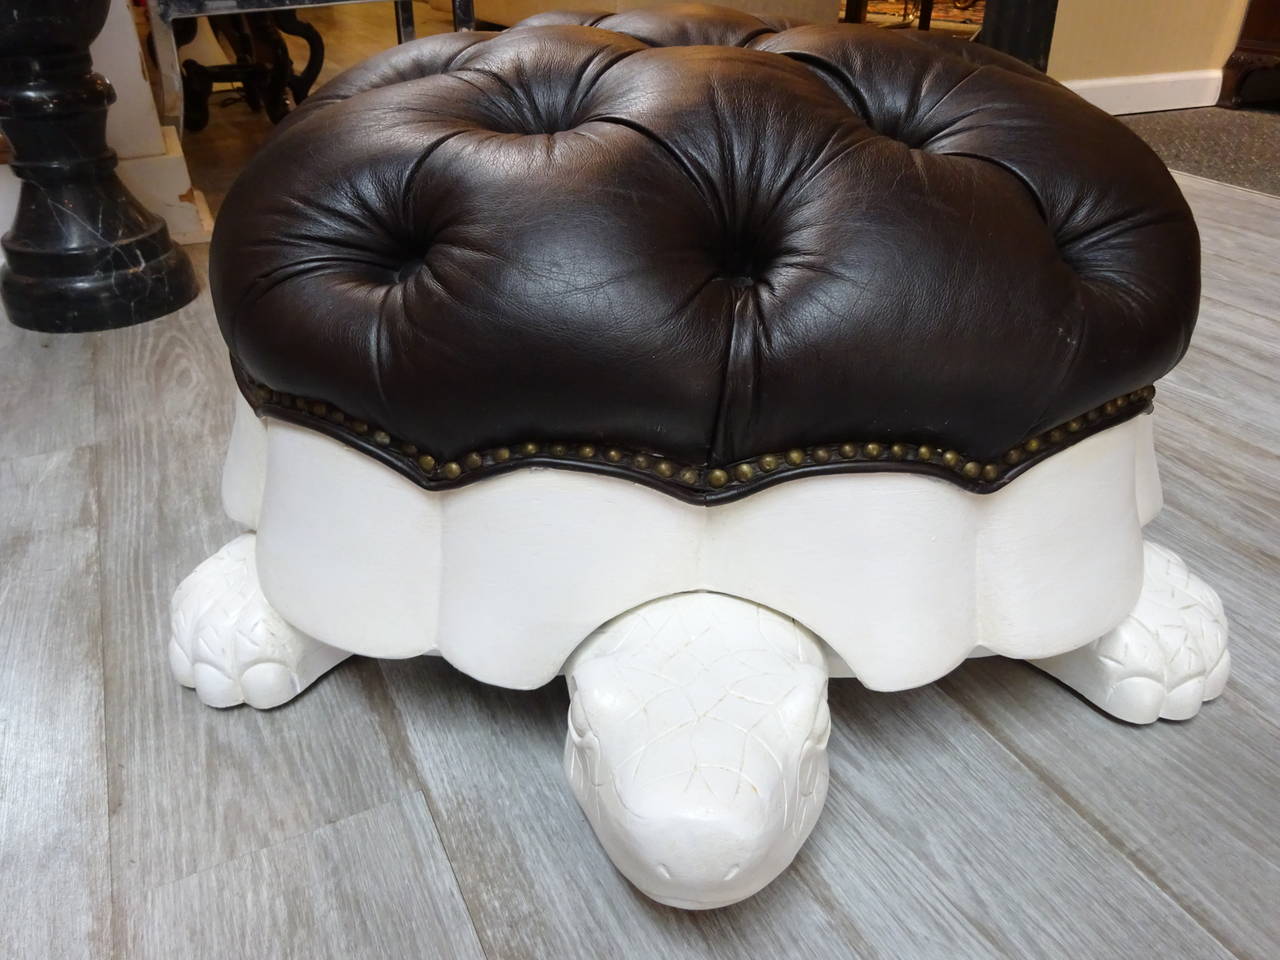 Leather turtle ottoman, realistically modeled of polychromed carved wood, with tufted leather cushion.